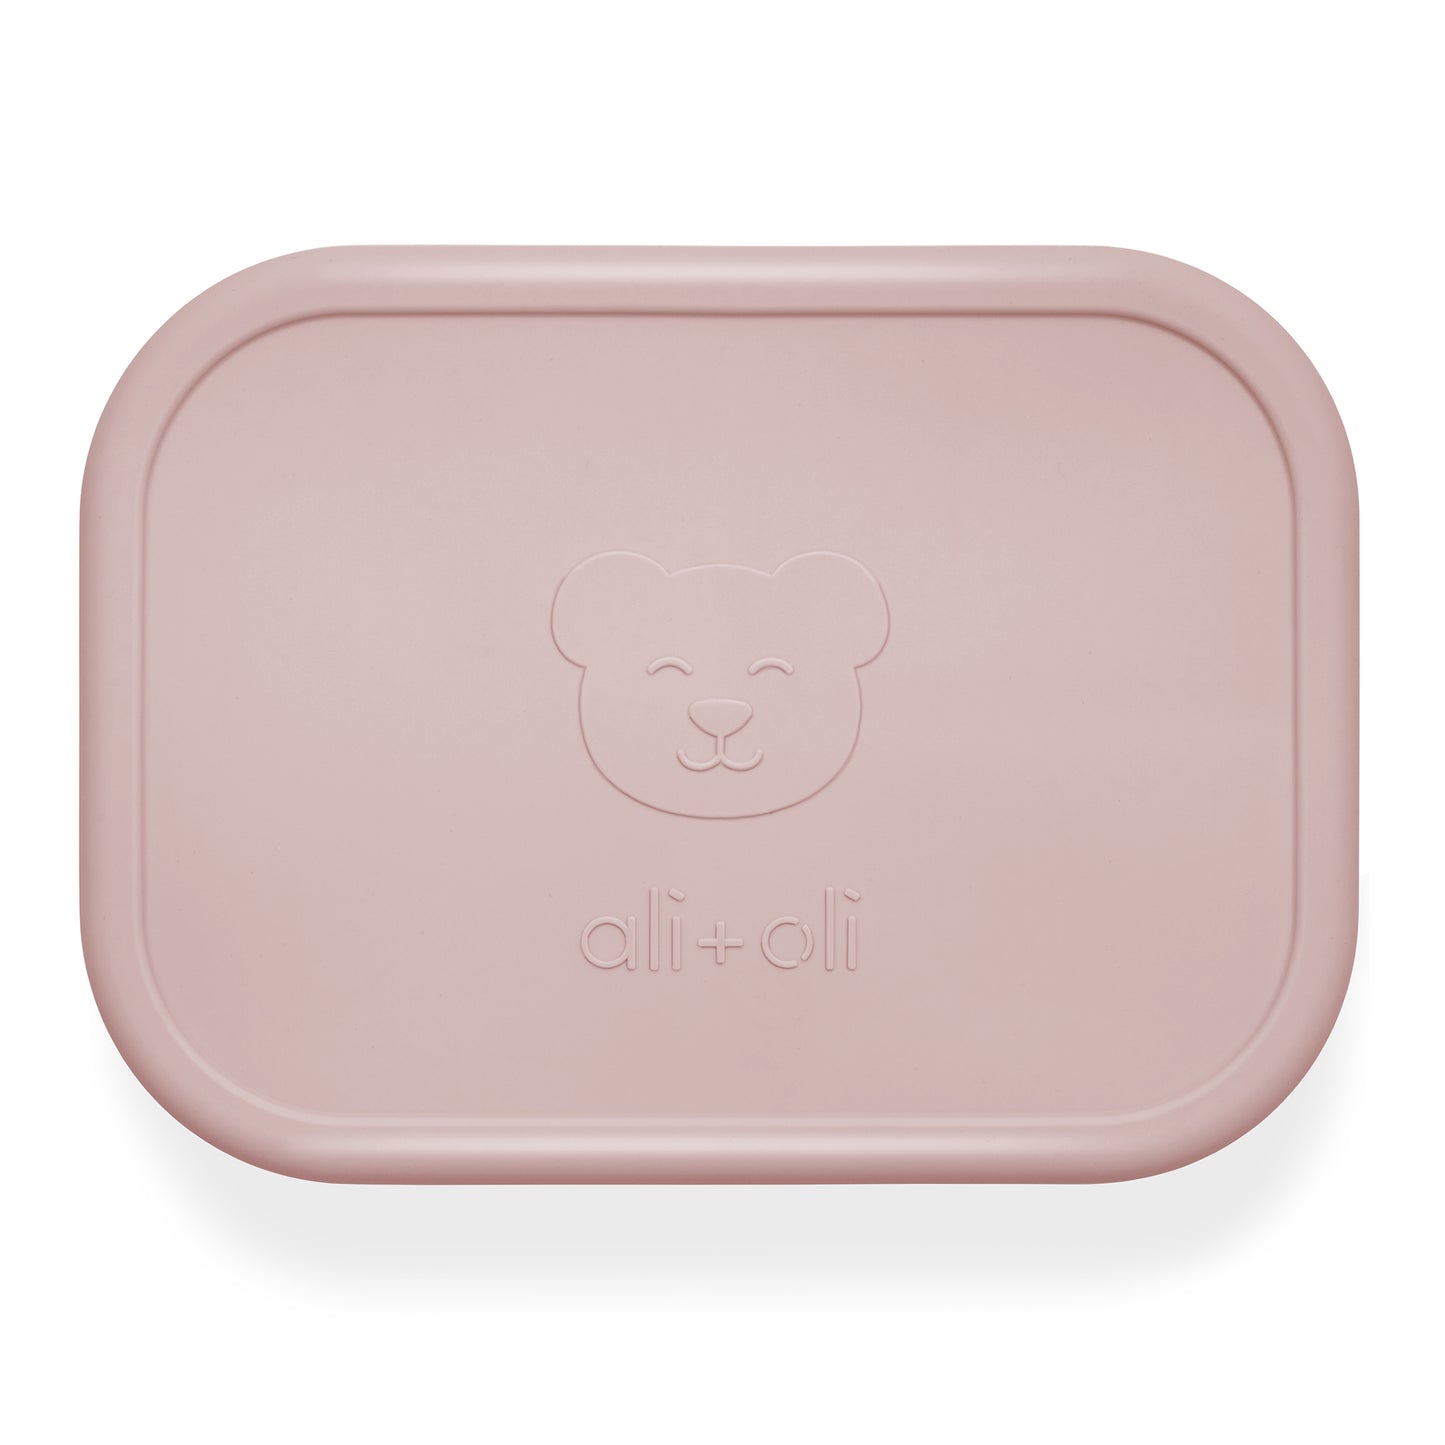 Ali+Oli Reusable Silicone Bento Box - 3 Compartments - Leakproof (Rose)